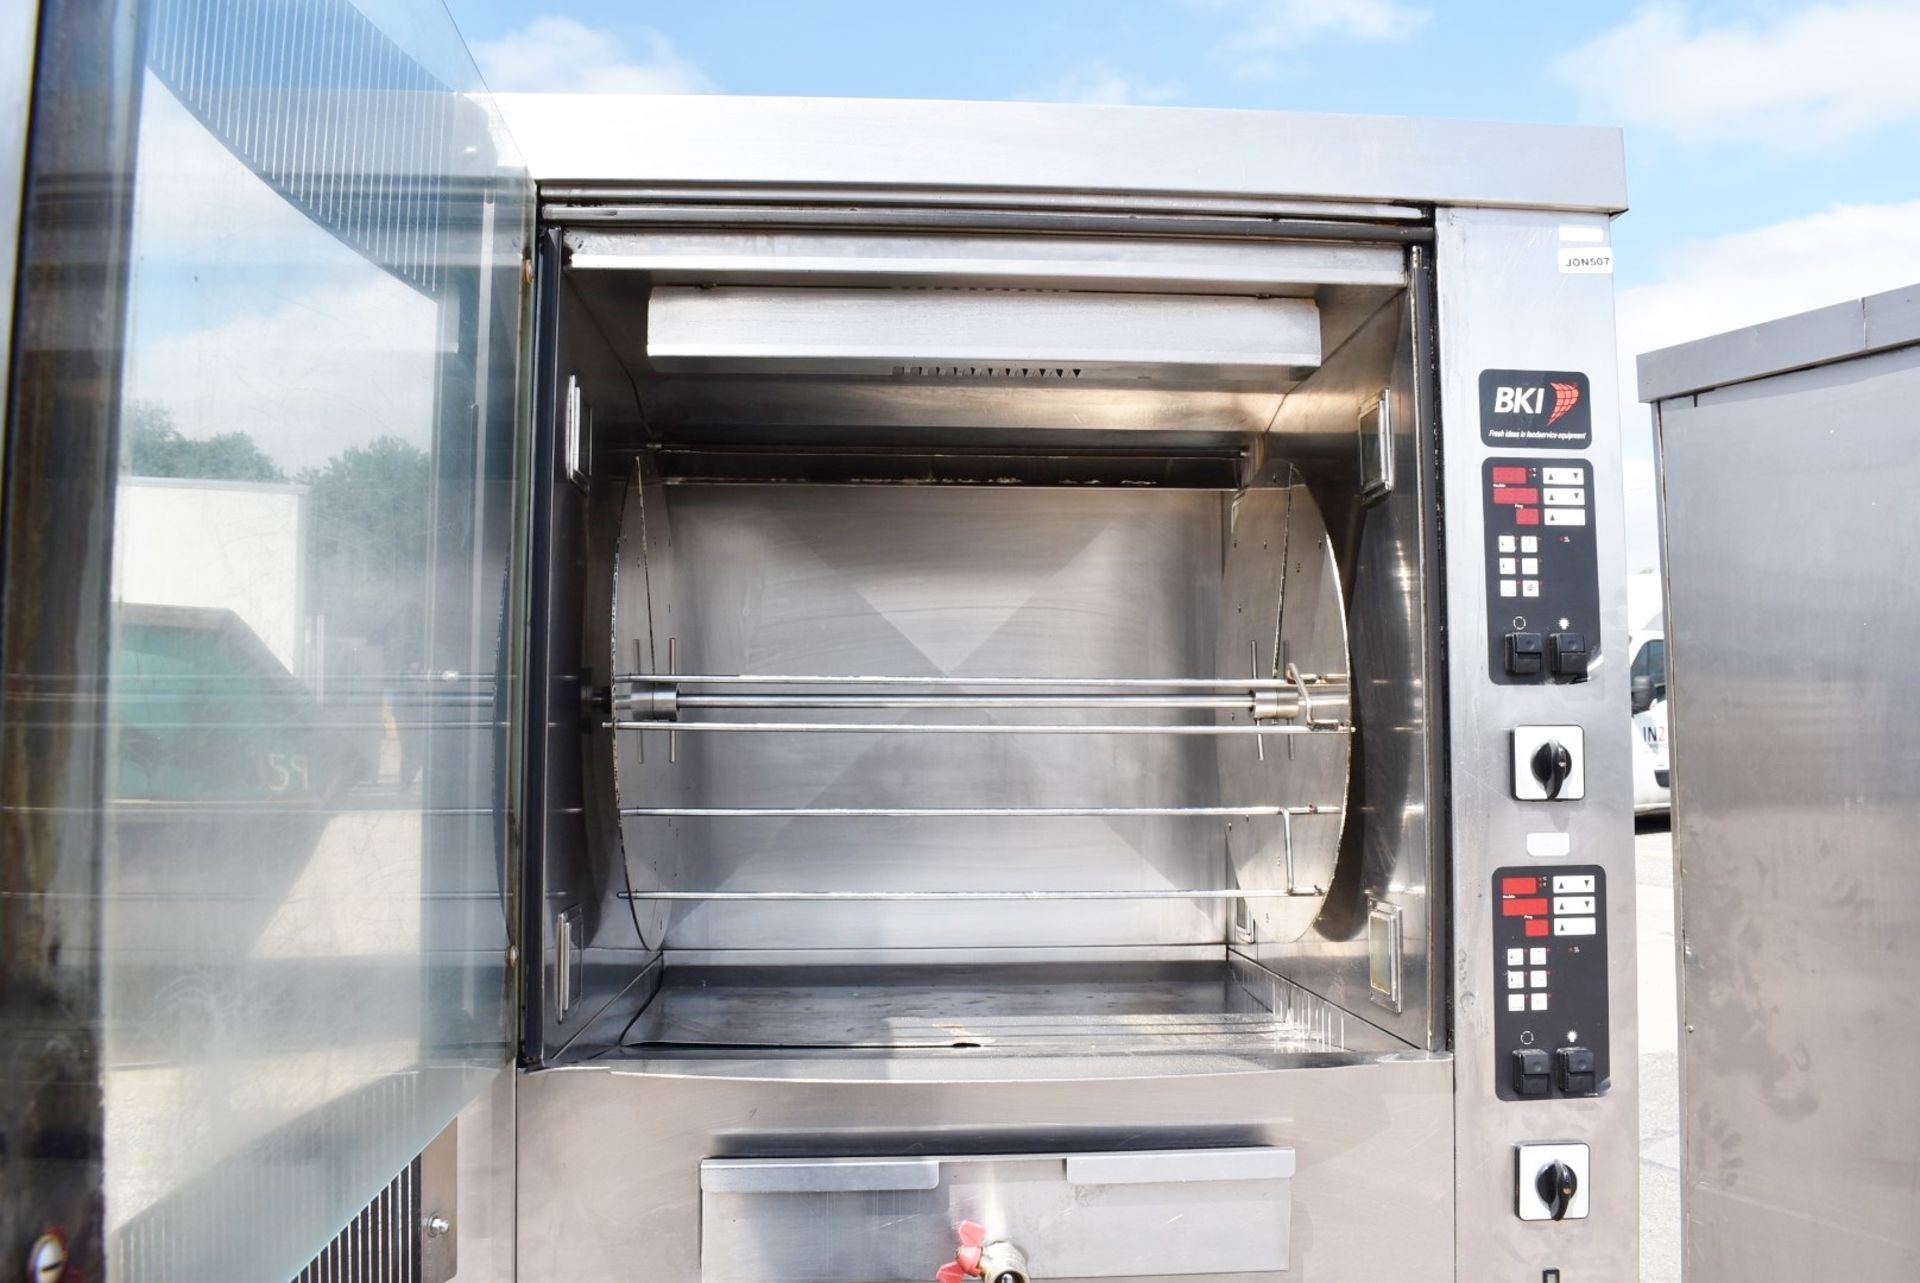 1 x BKI BBQ King Commercial Double Rotisserie Chicken Oven With Stand - Type VGUK16 - 3 Phase - Image 20 of 21